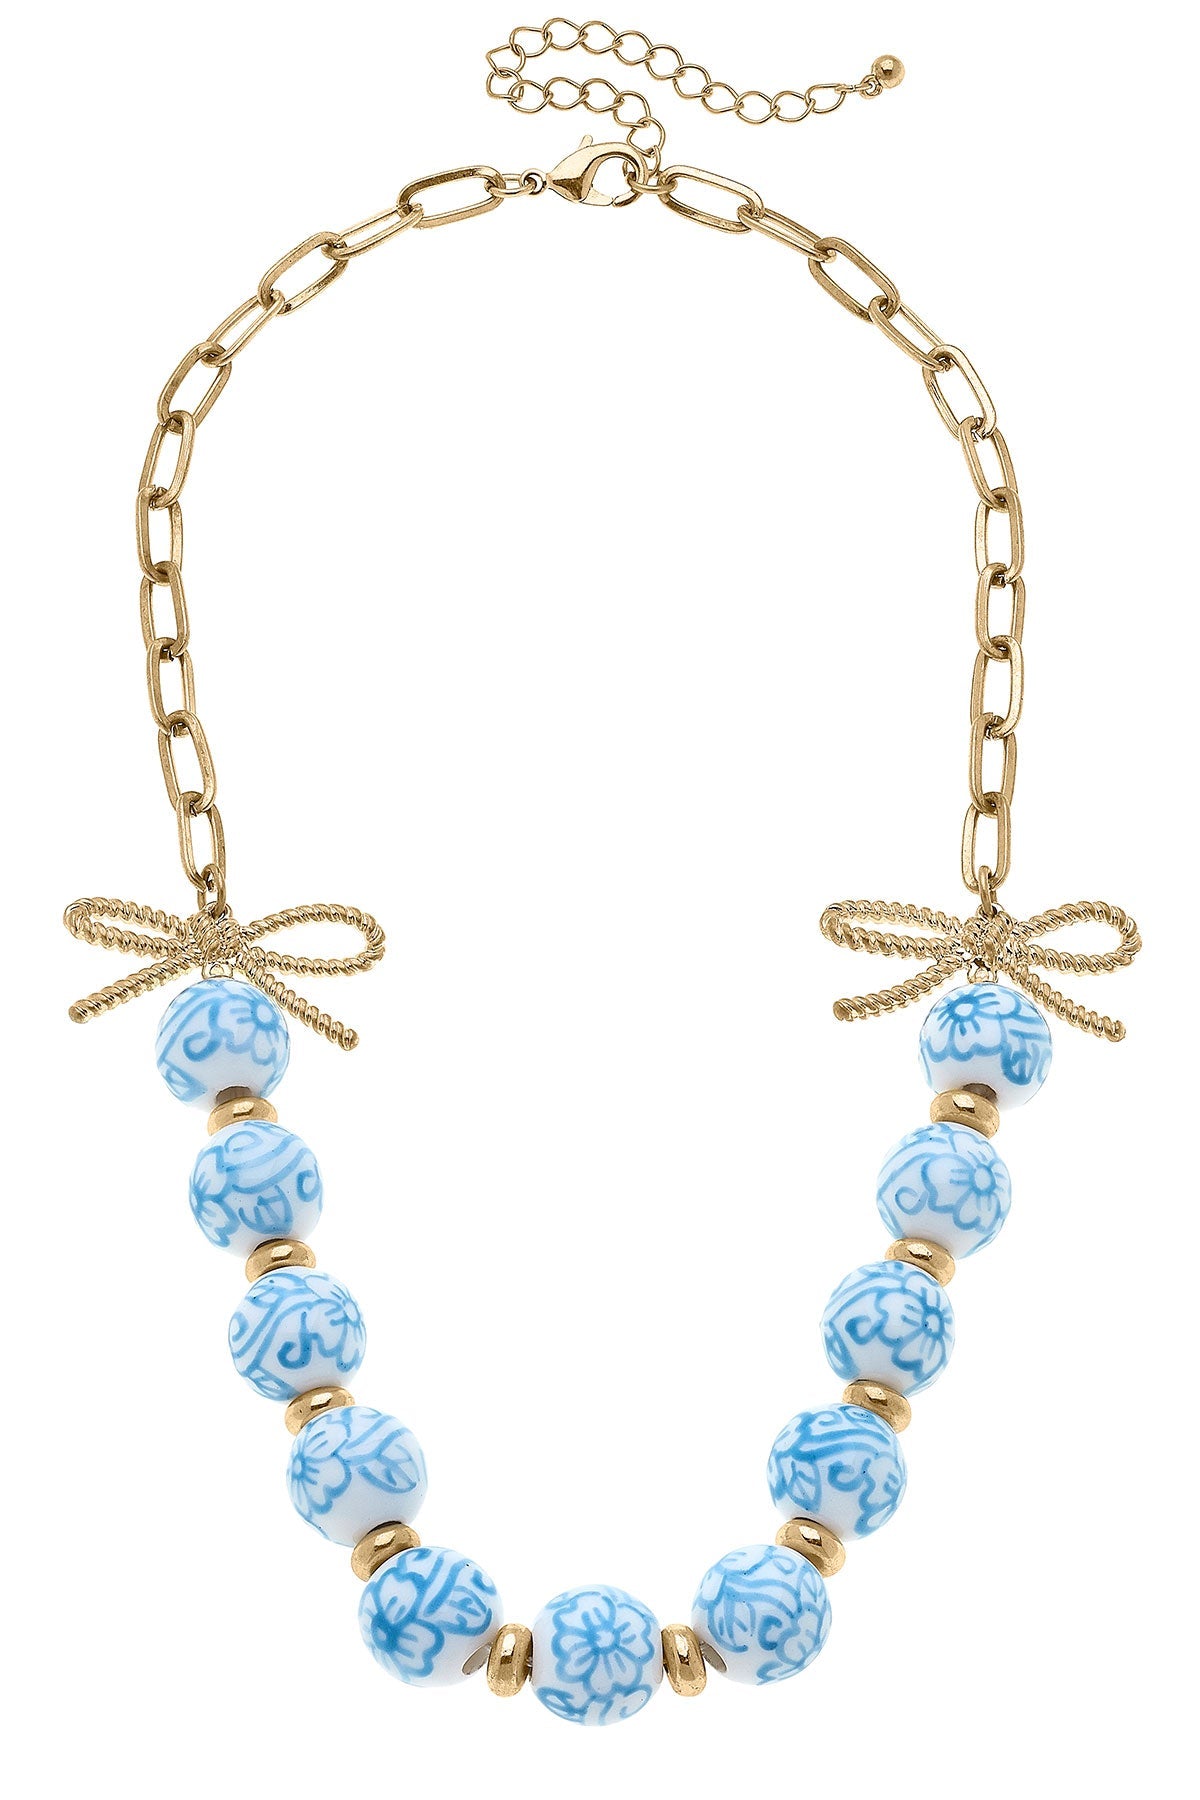 Eloise Porcelain Beaded Chain Link Necklace in Wedgwood Blue